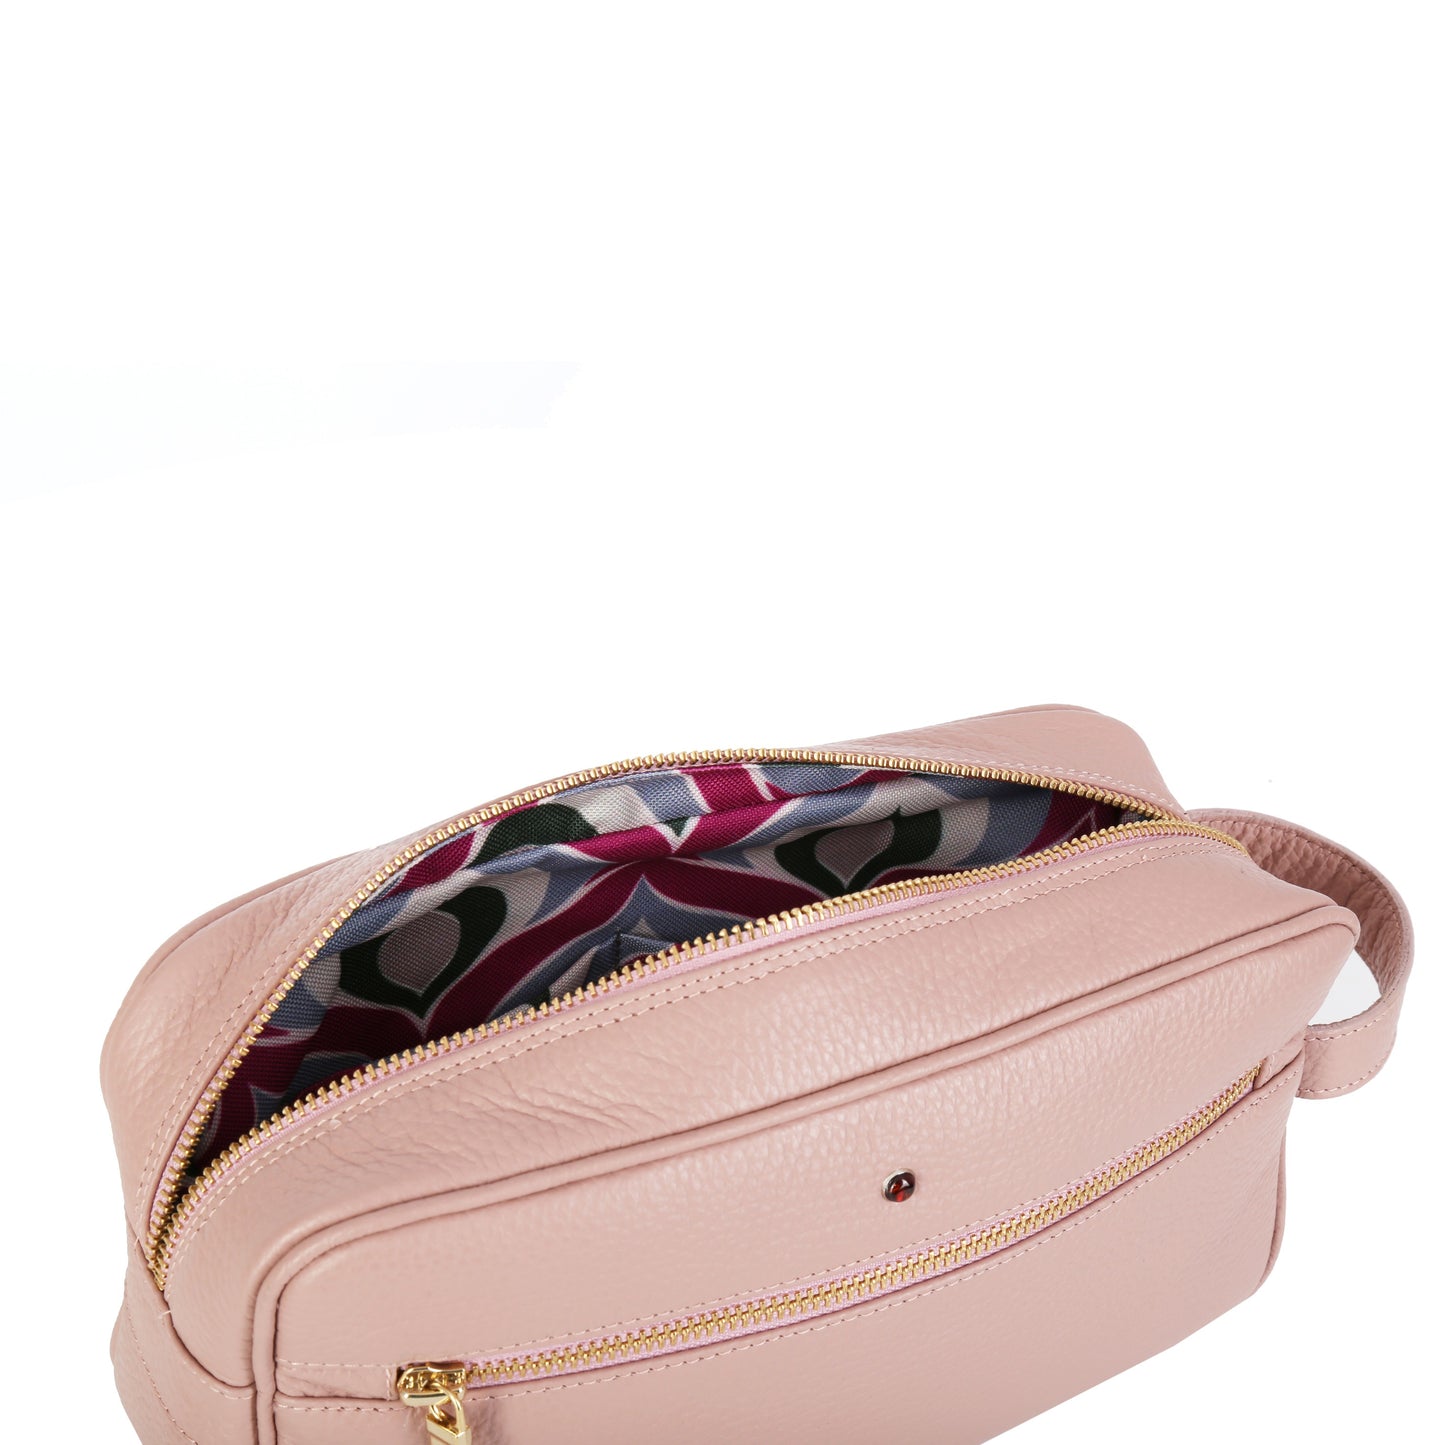 Women's leather cosmetic bag FLOTER POWDER PINK